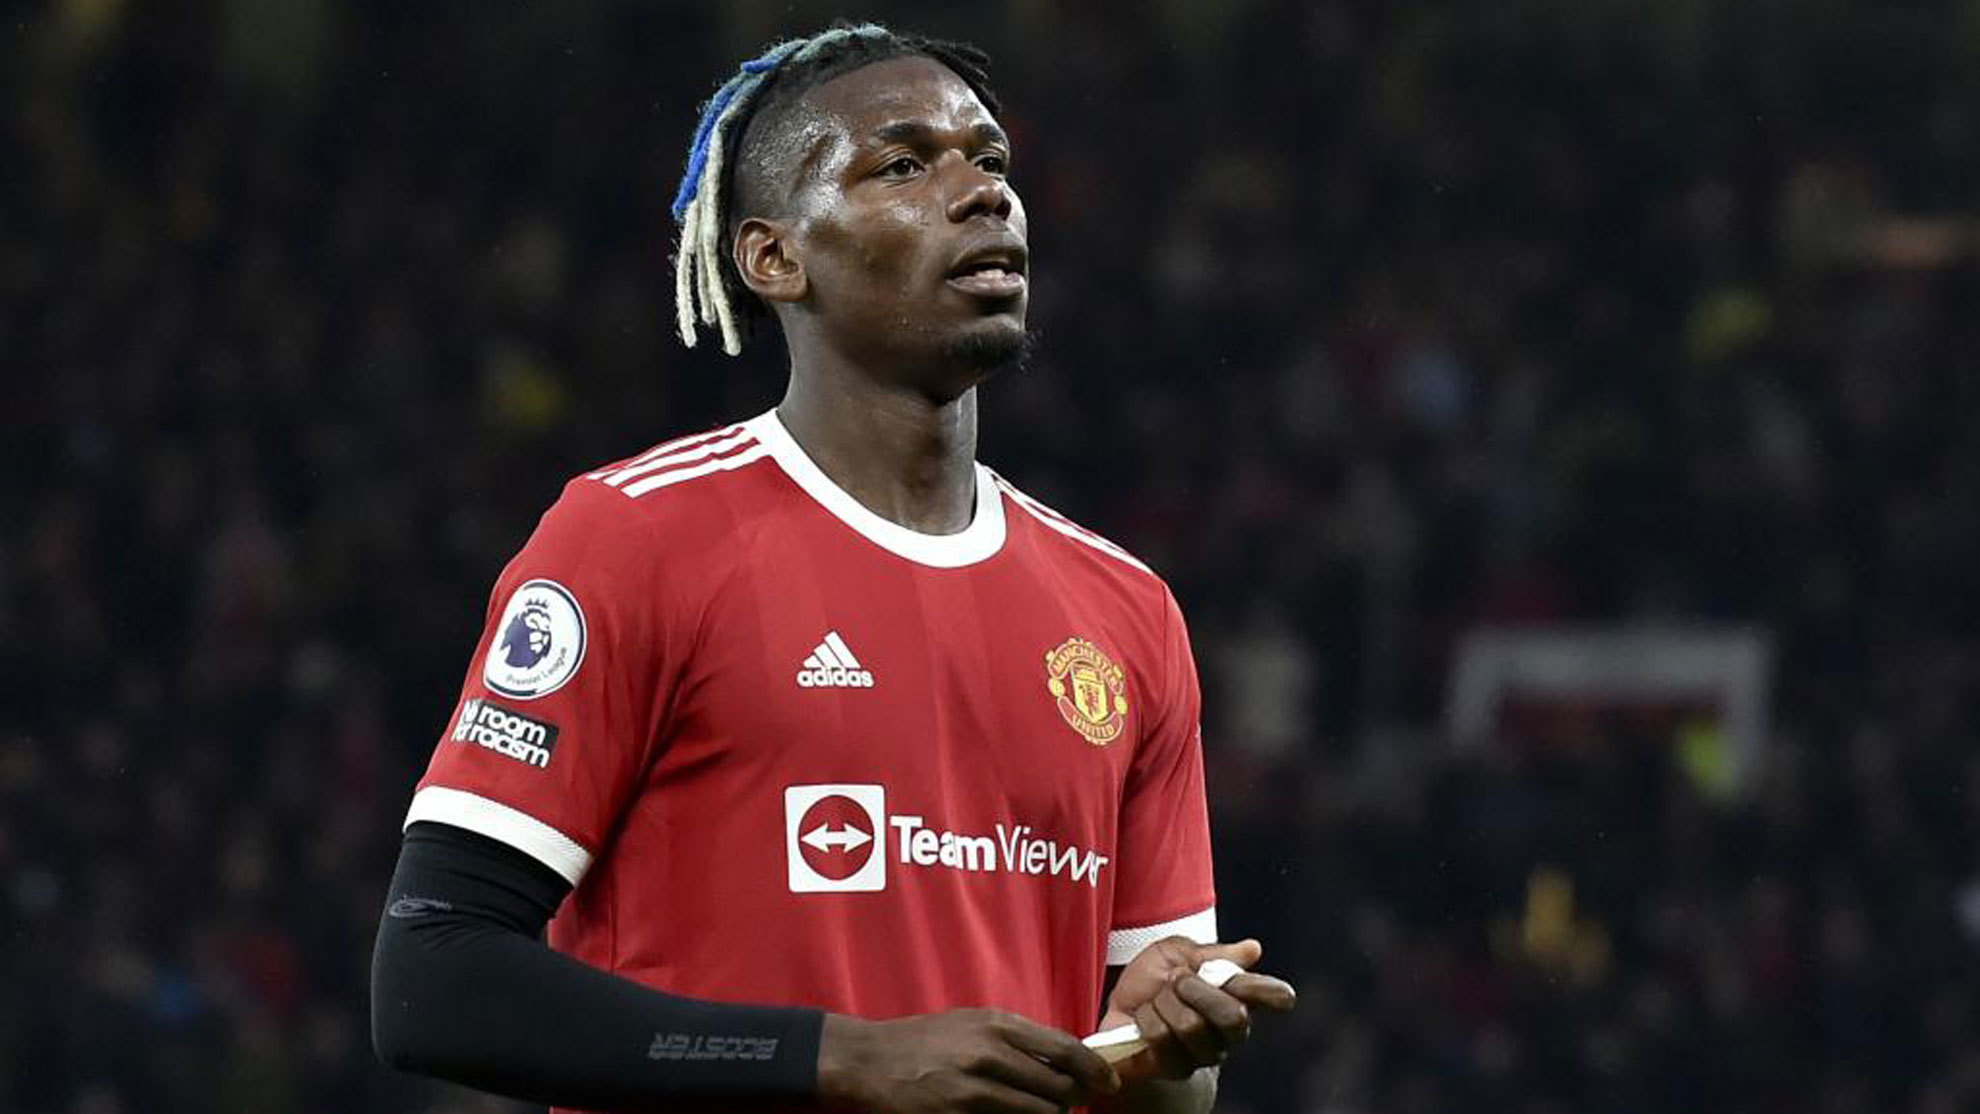 The situation regarding Paul Pogba's Manchester United future still unclear